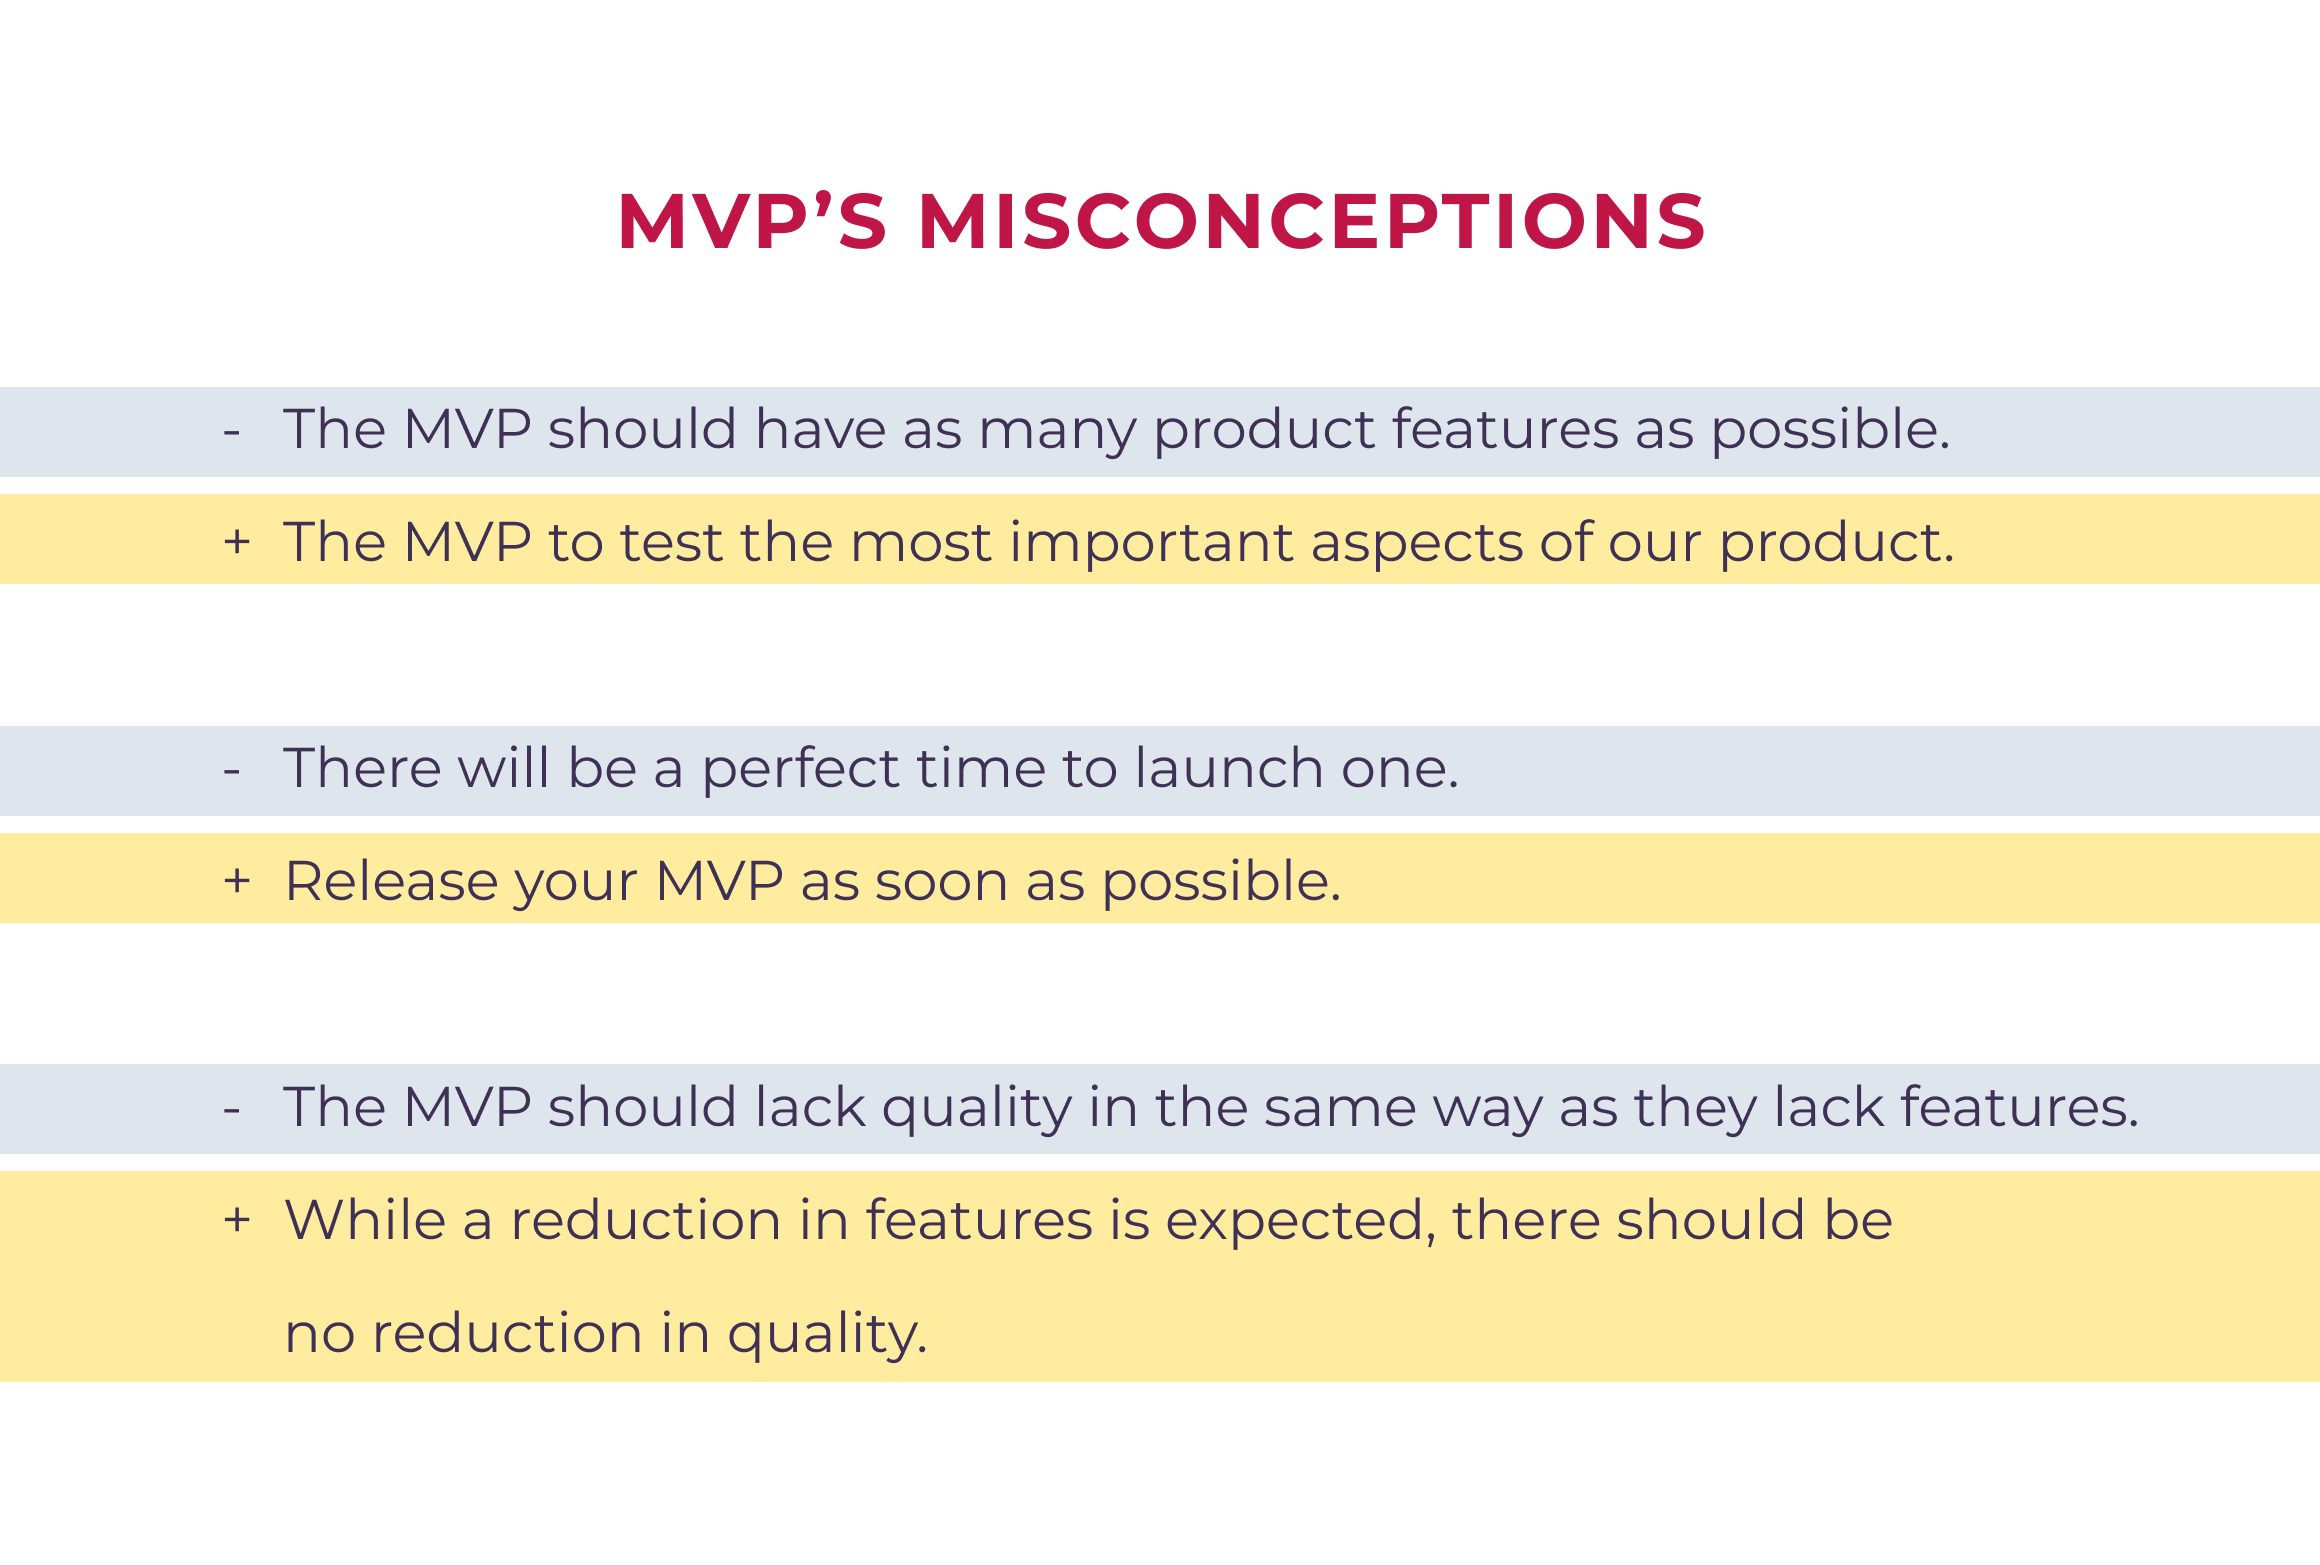 Misconceptions about MVPs